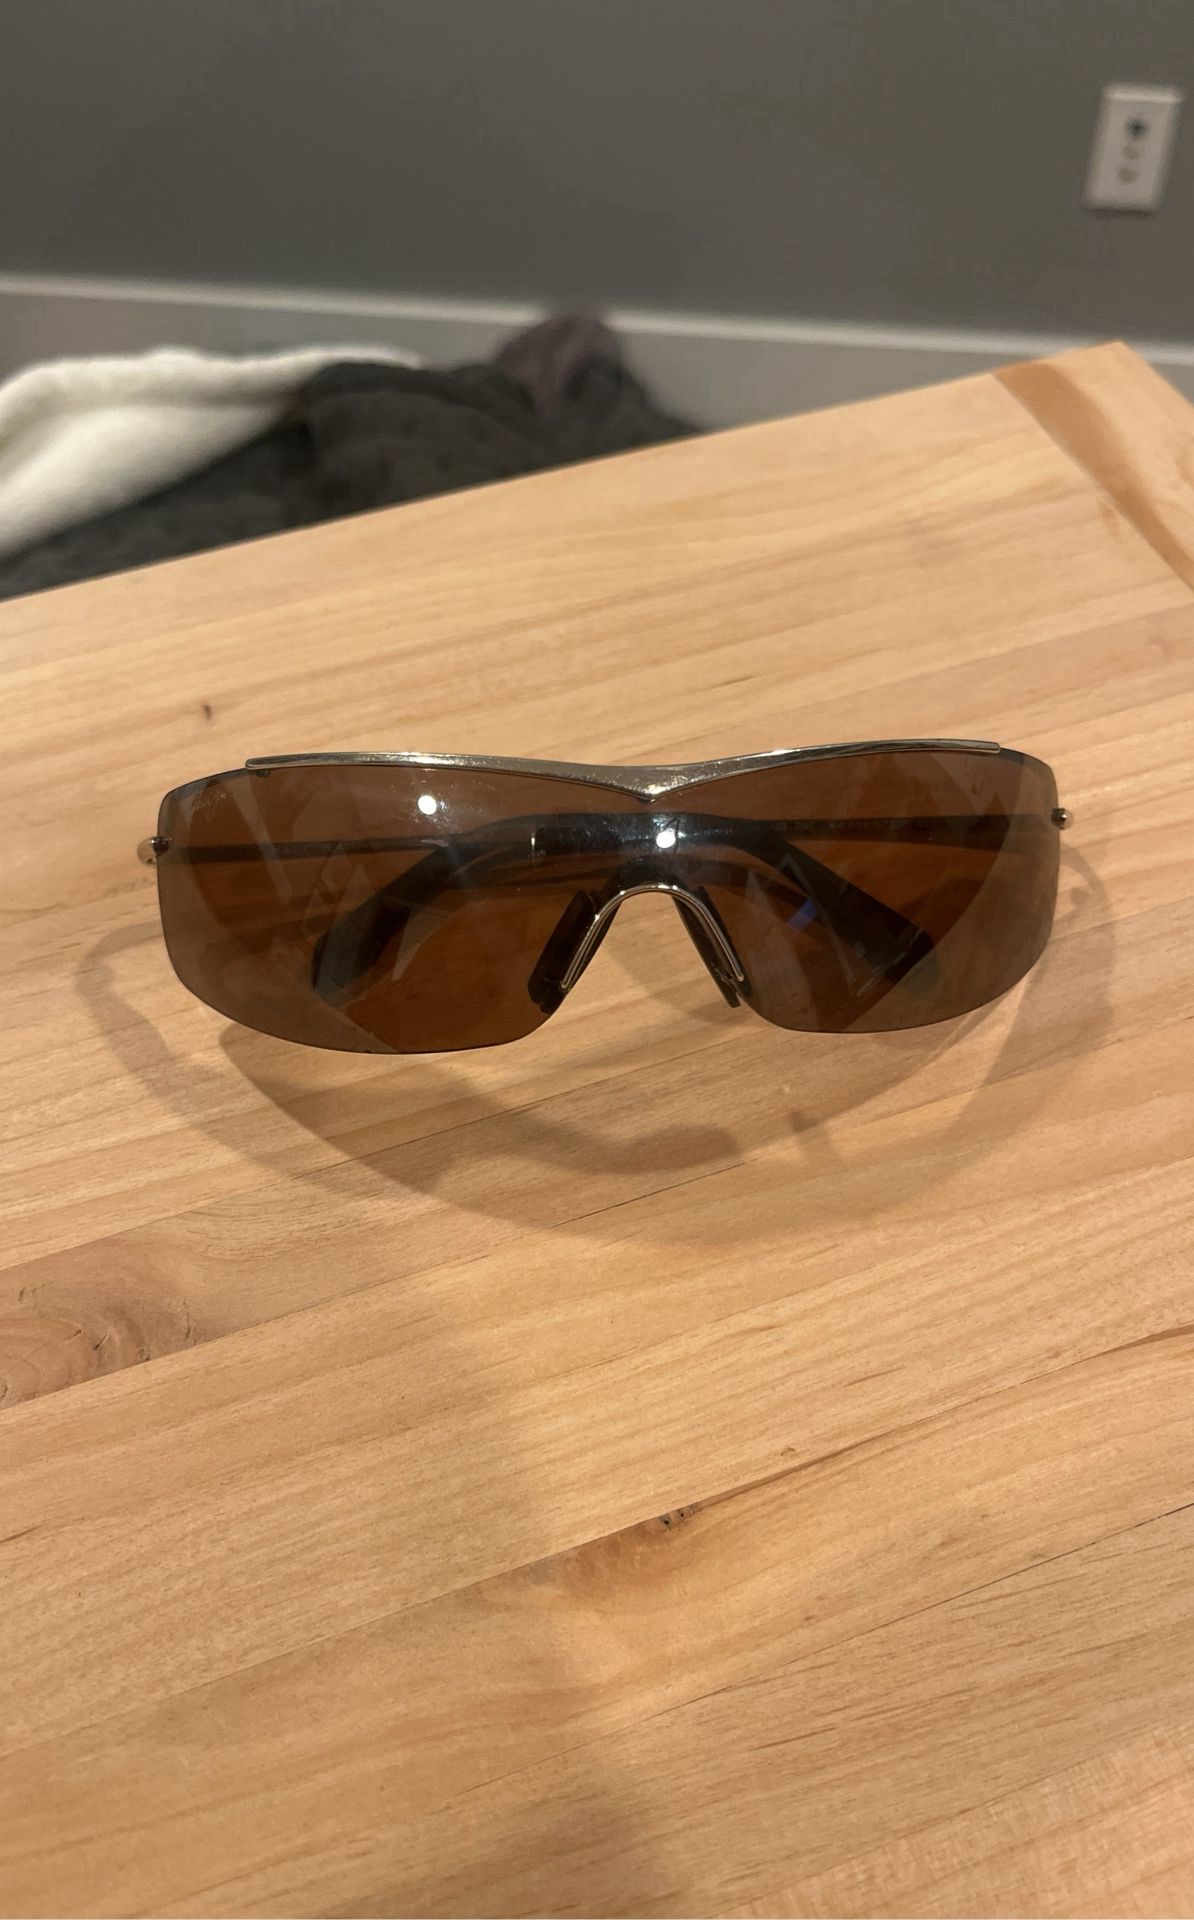 Maui Jim Sunglasses - With Case Included